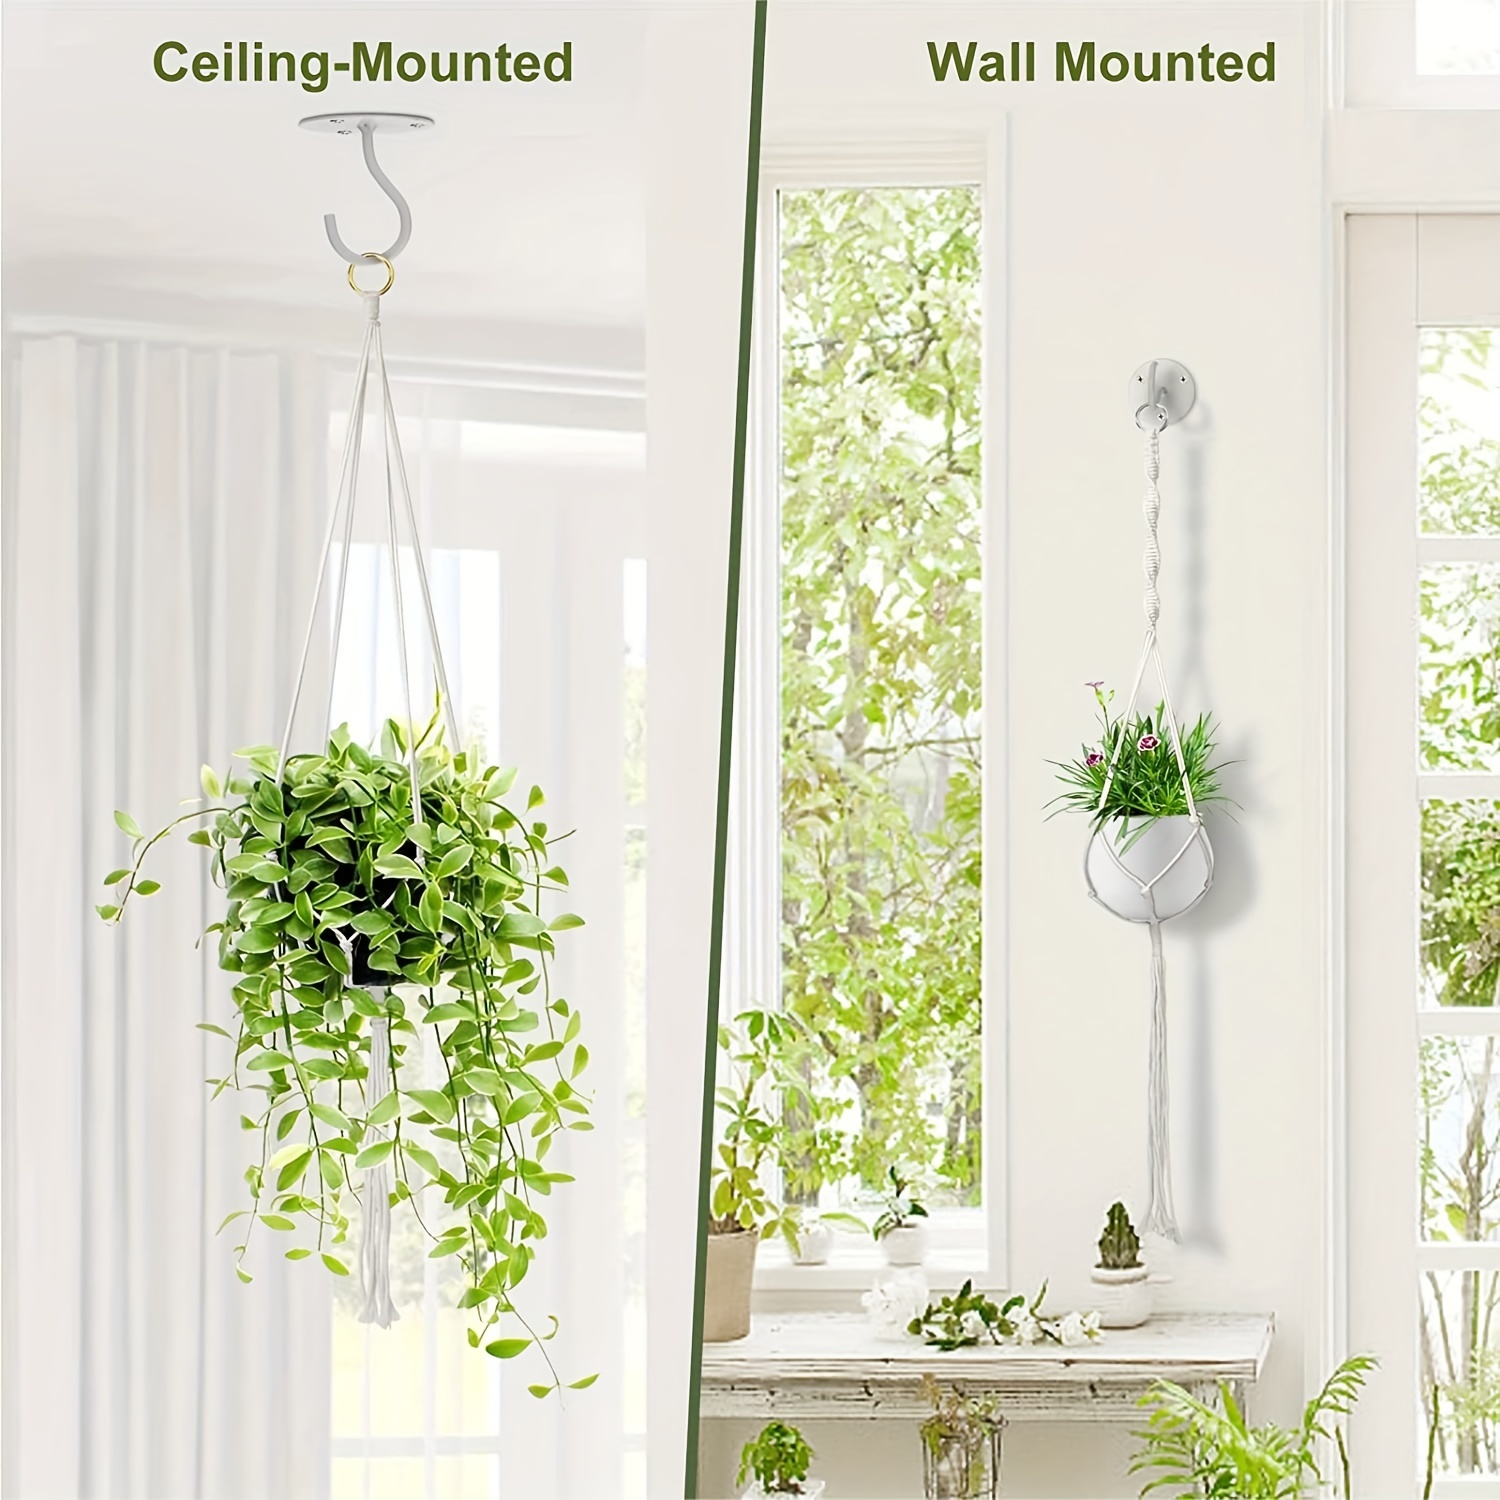  Ceiling Hooks For Hanging Plants-Metal Heavy Duty